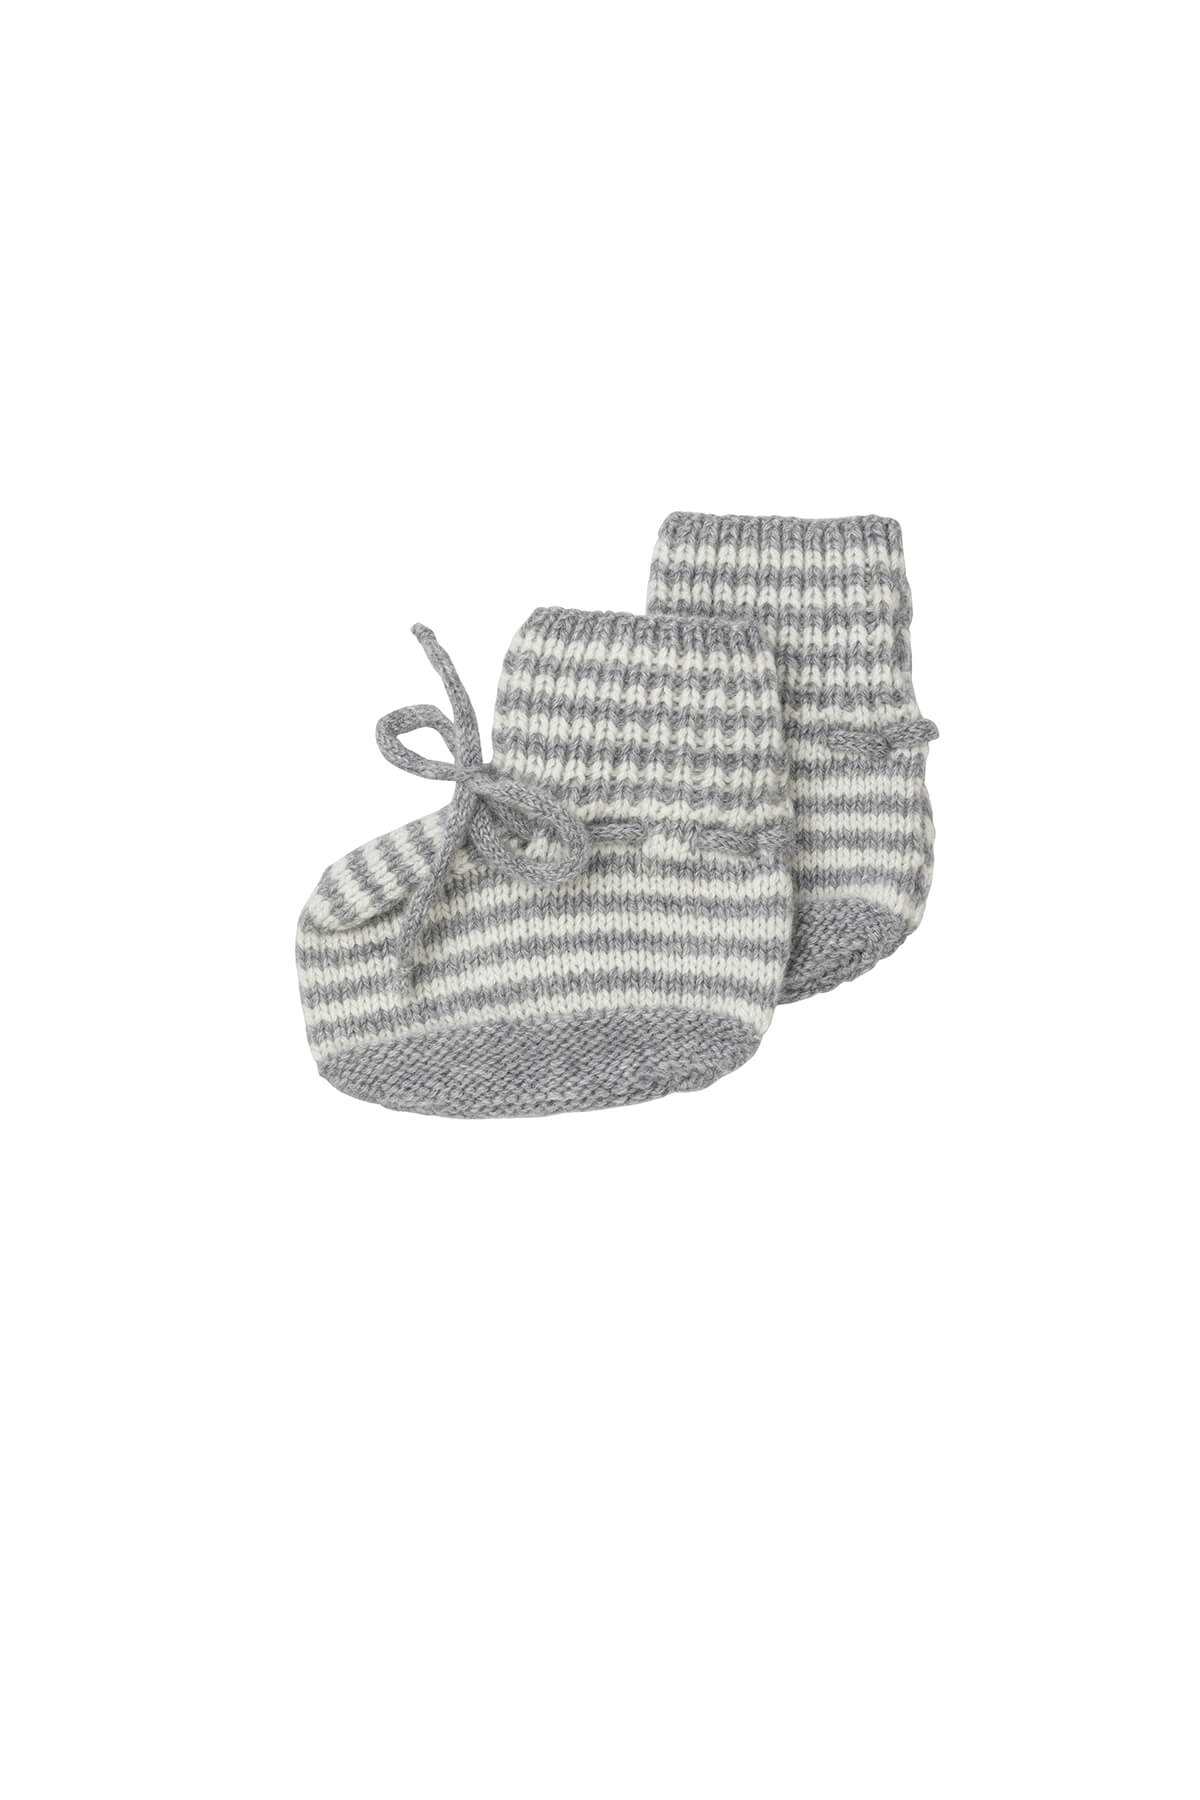 Johnstons of Elgin Hand Knitted Cashmere Baby Booties with crotched trims in Silver & White on a white background 746334243